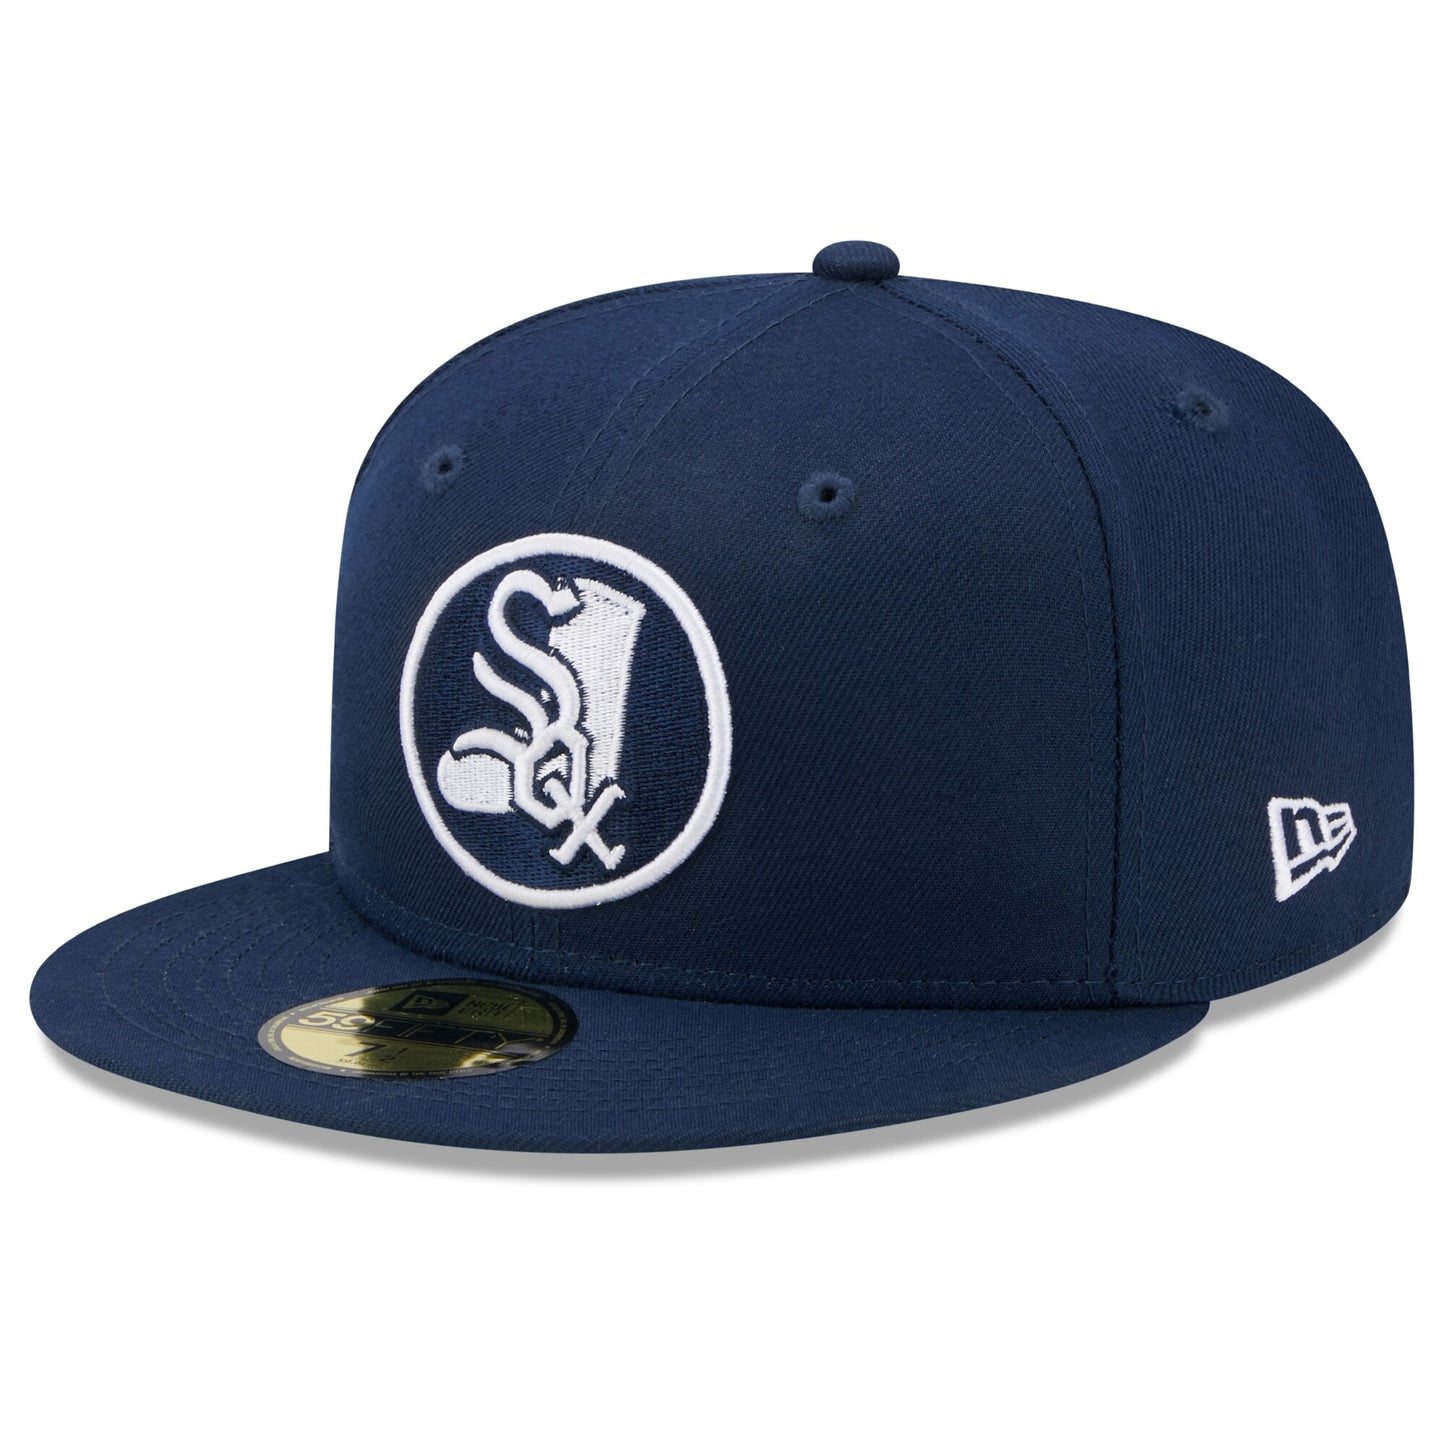 Chicago White Sox New Era Cooperstown Collection Oceanside Green Undervisor 59FIFTY Fitted Hat - Navy